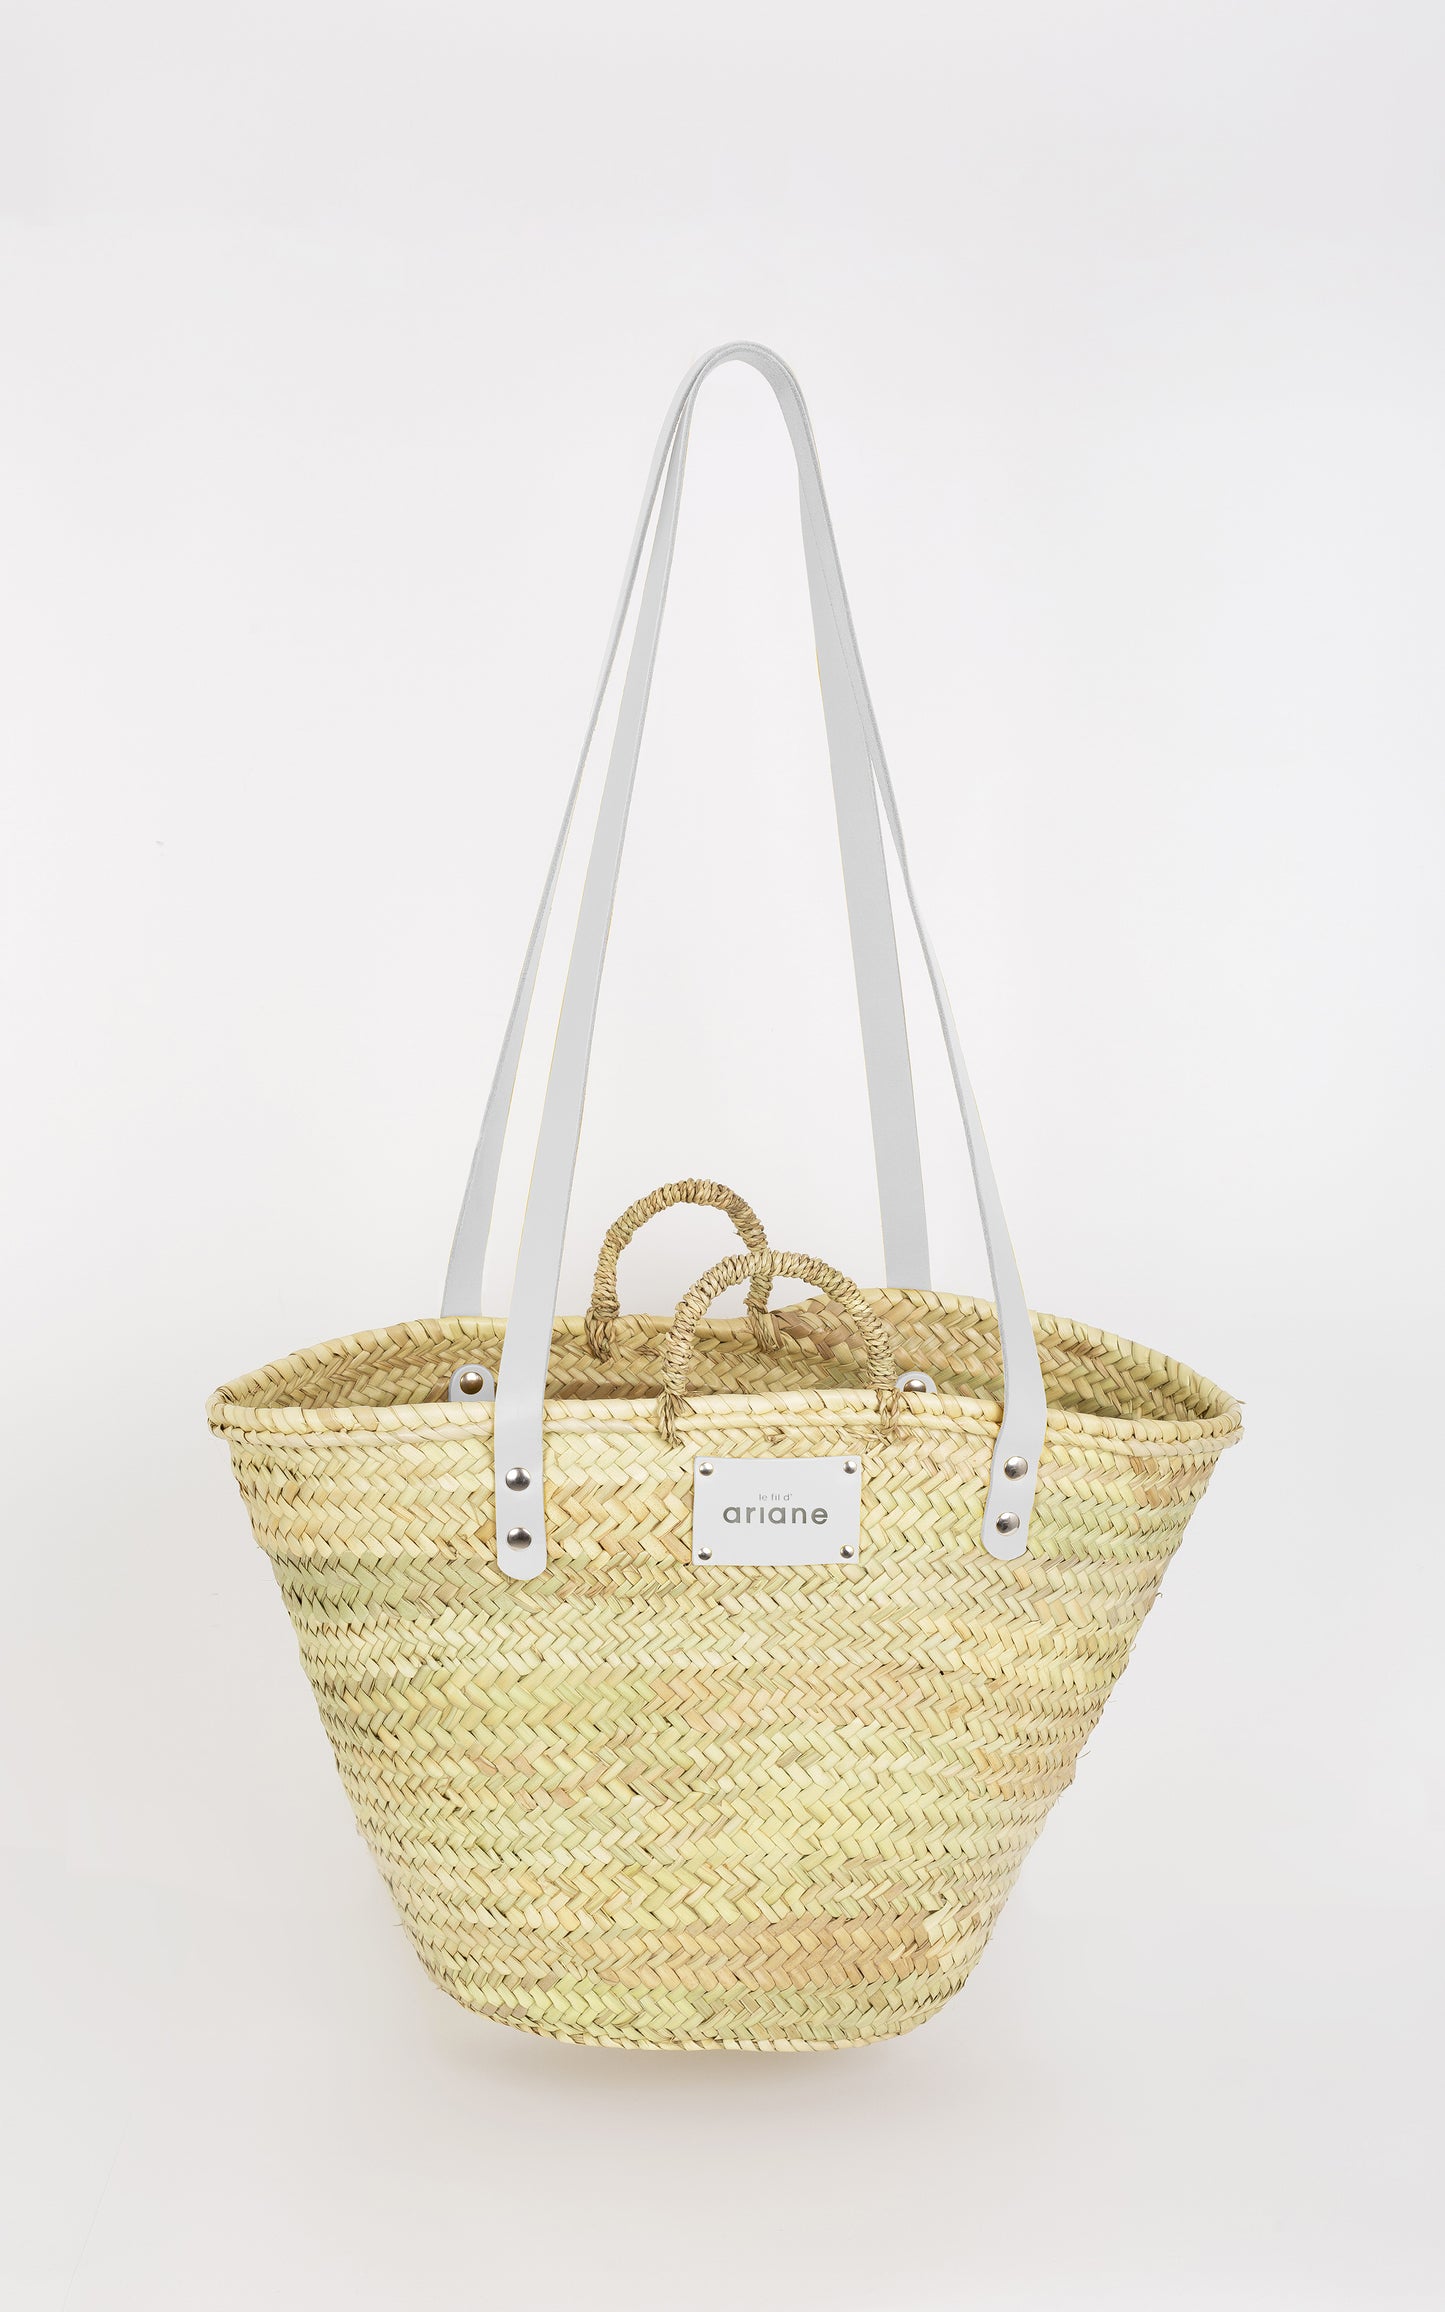 Panier THESEE - Taille L - Anses larges blanches